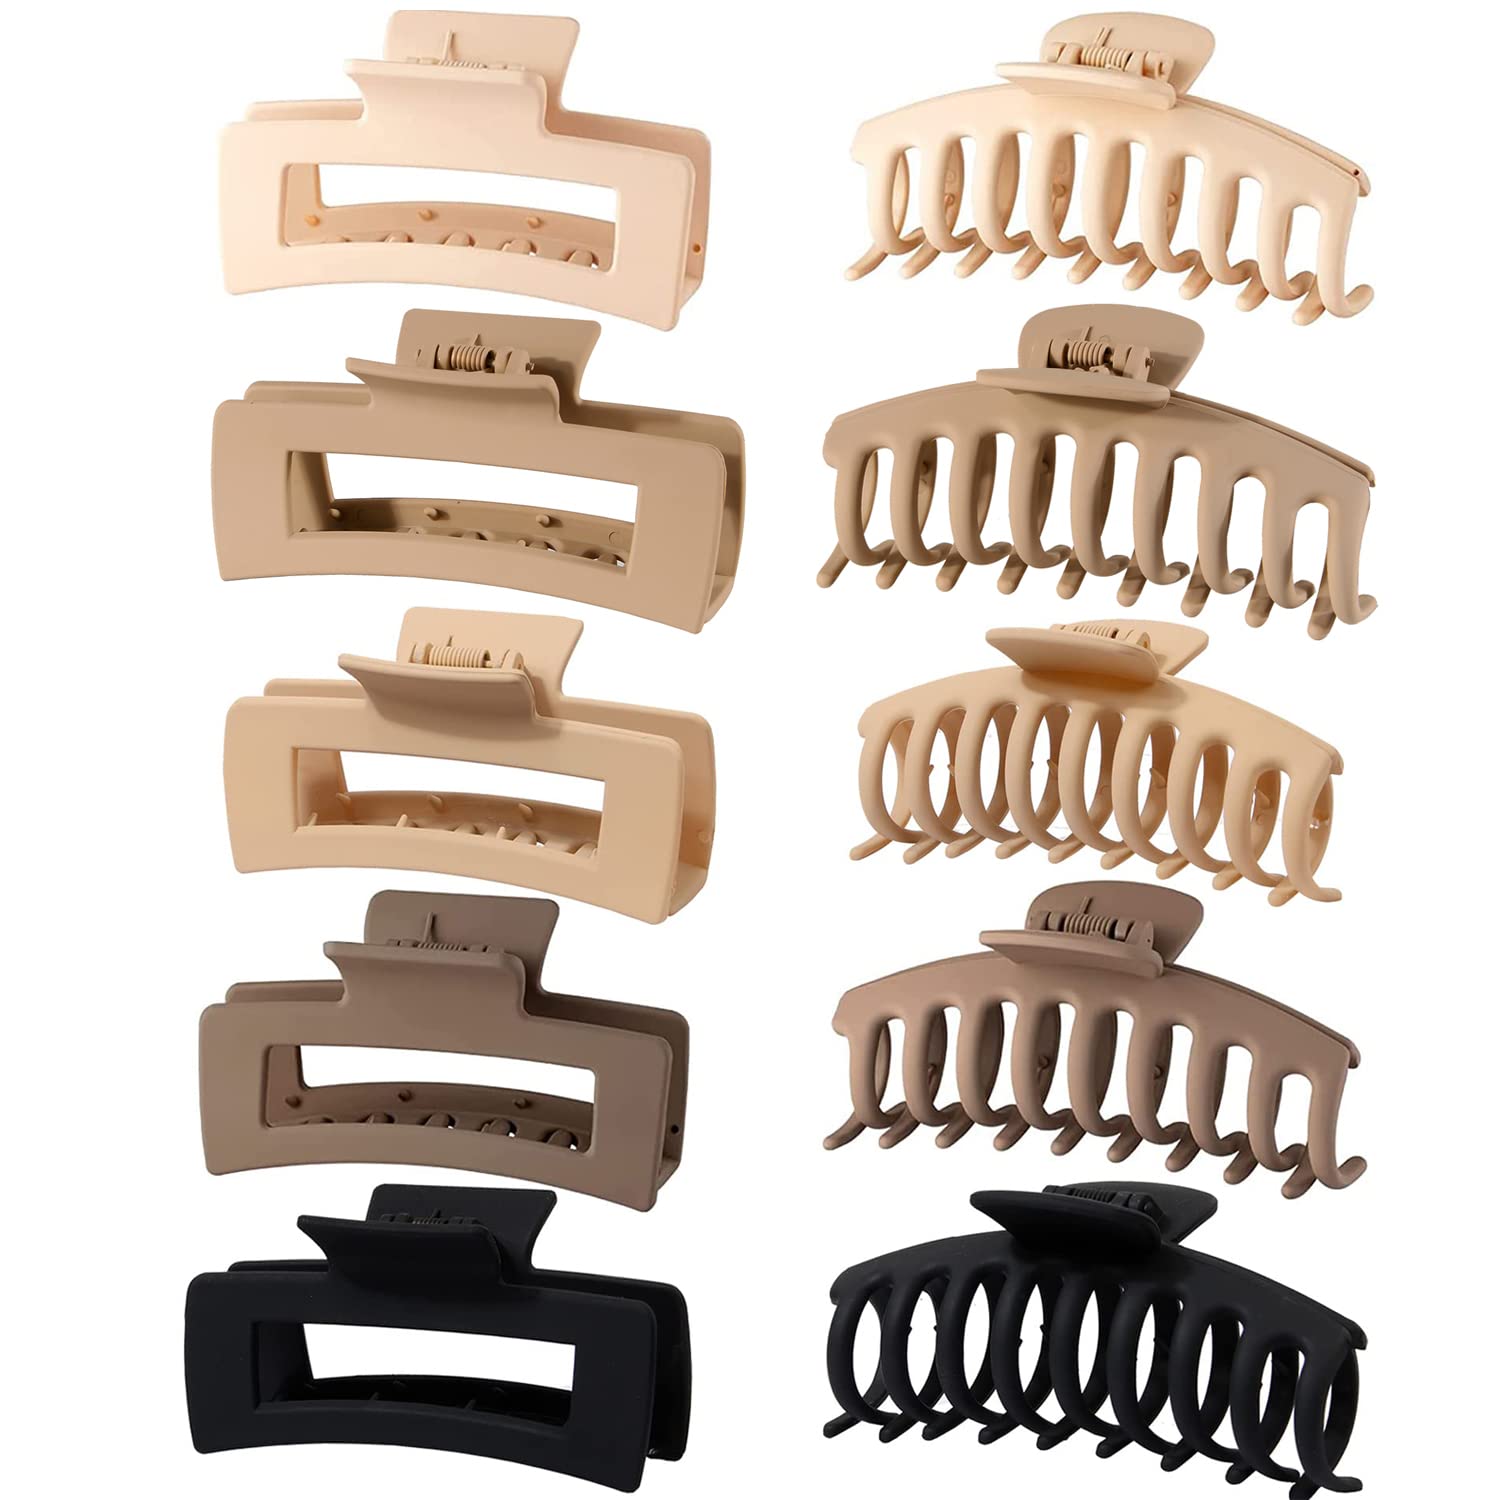 10 Pack 4.4 Large Hair Clips,Claw Clips,Hair Clips for Women